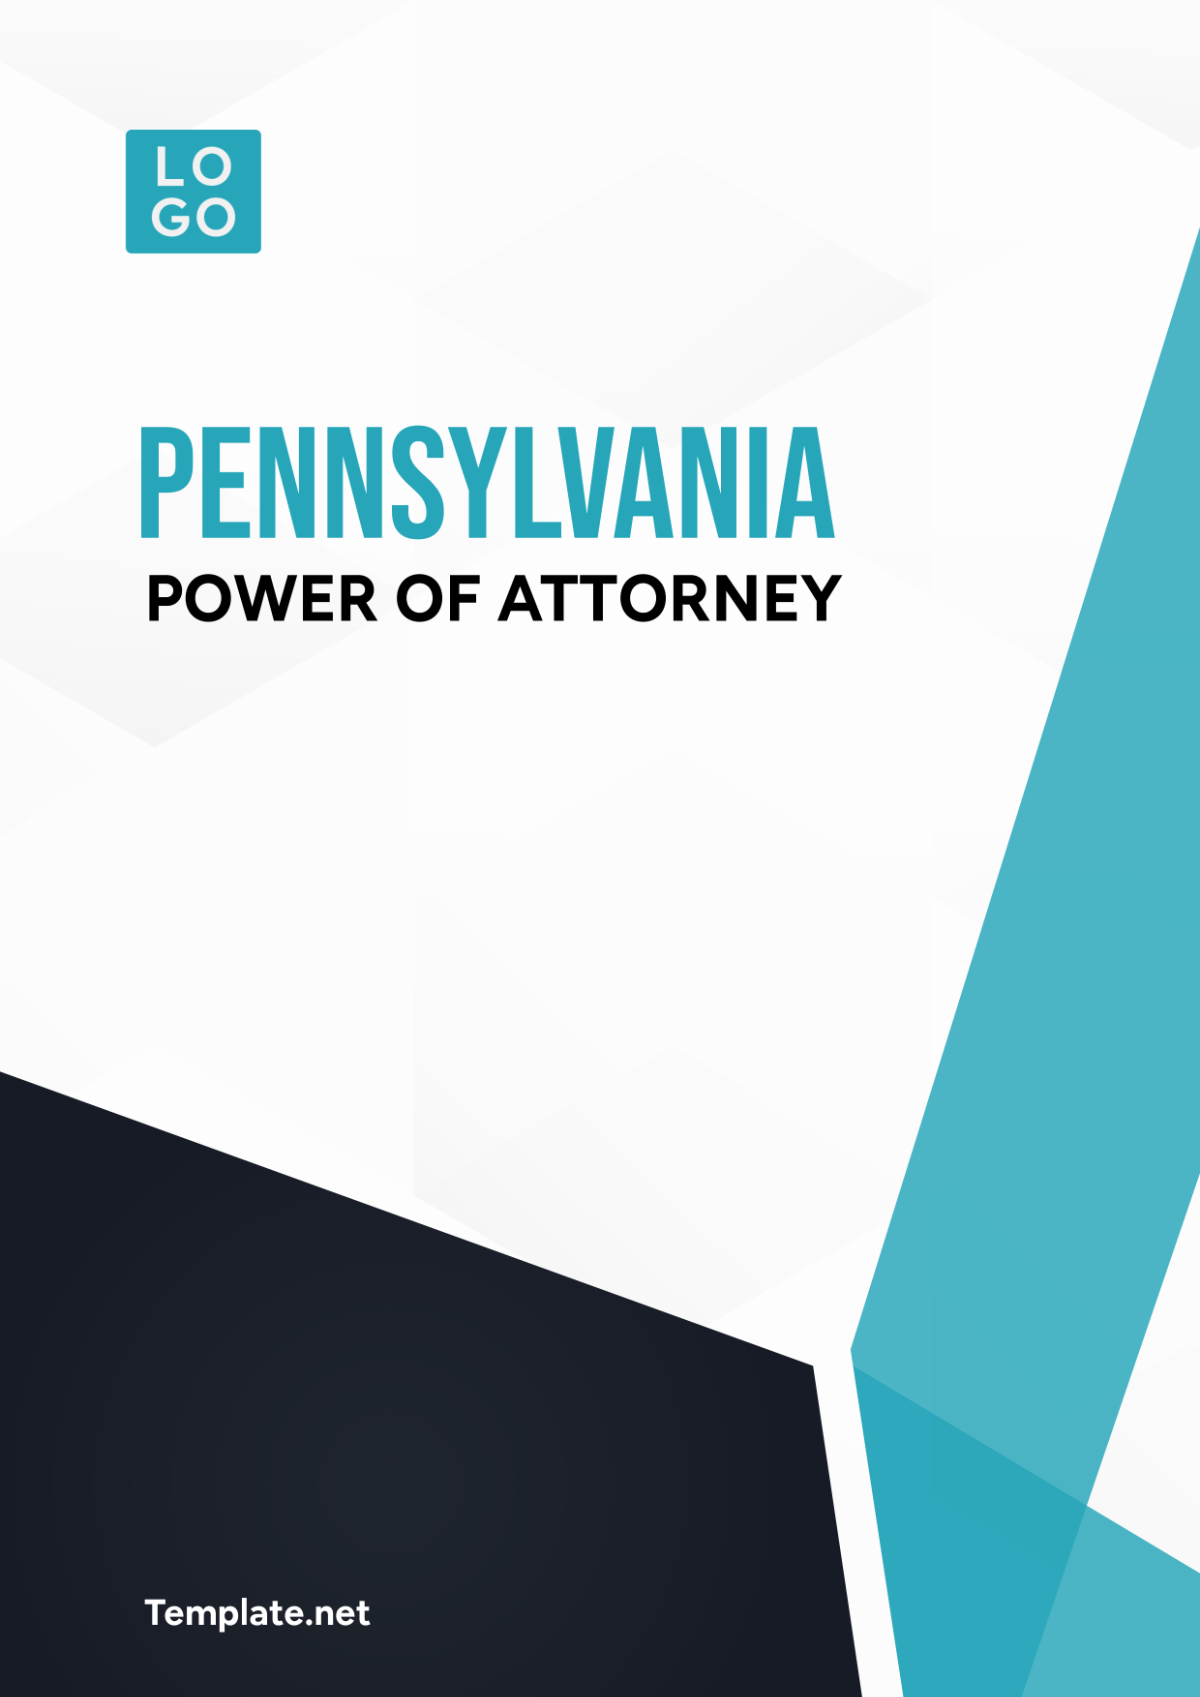 Pennsylvania Power of Attorney Cover Page